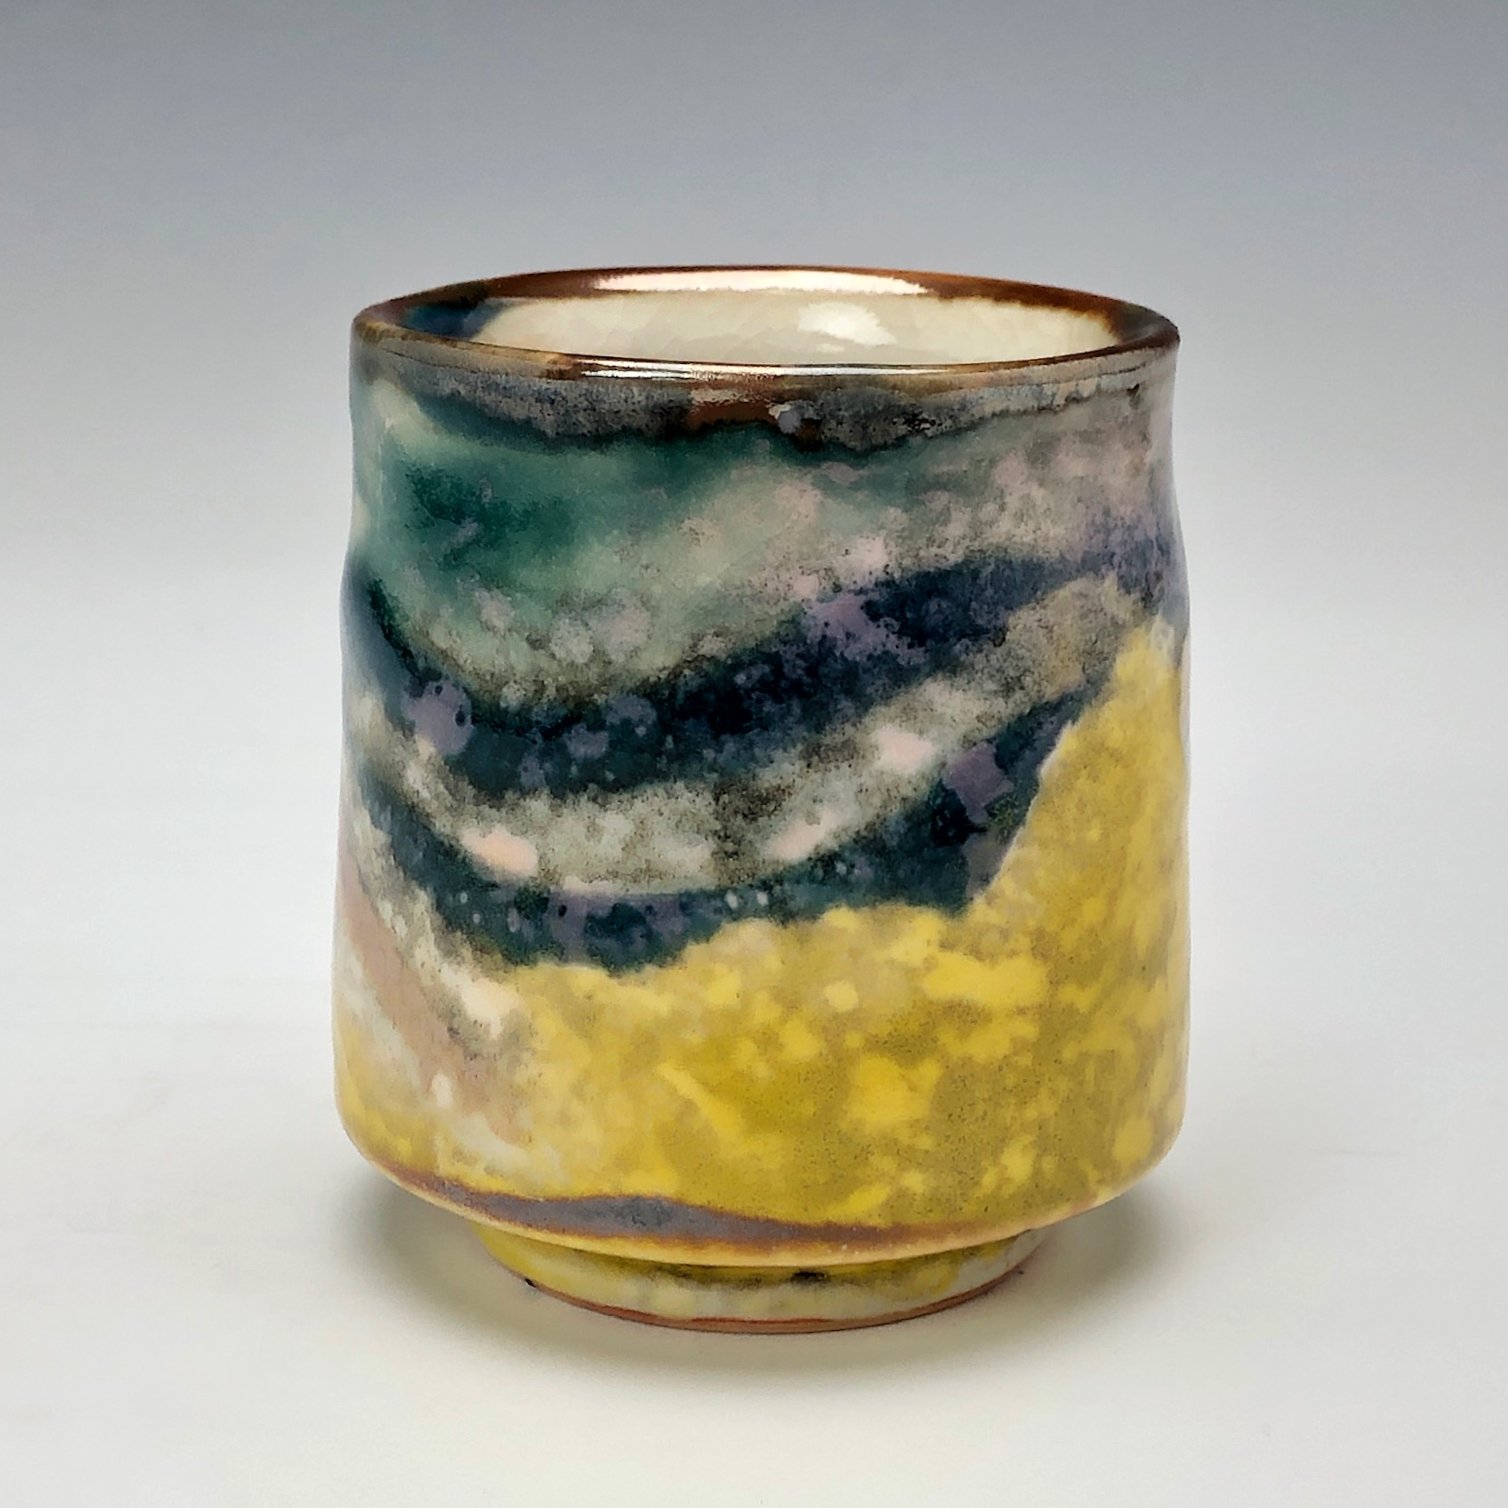  Bruce Gholson, Bulldog Pottery, Seagrove, North Carolina   Yunomi 2  - Casual drinking cup made from porcelain with Iron Luster Fish. Ceramic cup also has swipes of yellow and blue. A textural shino is also glazed onto the some areas of the cup’s su